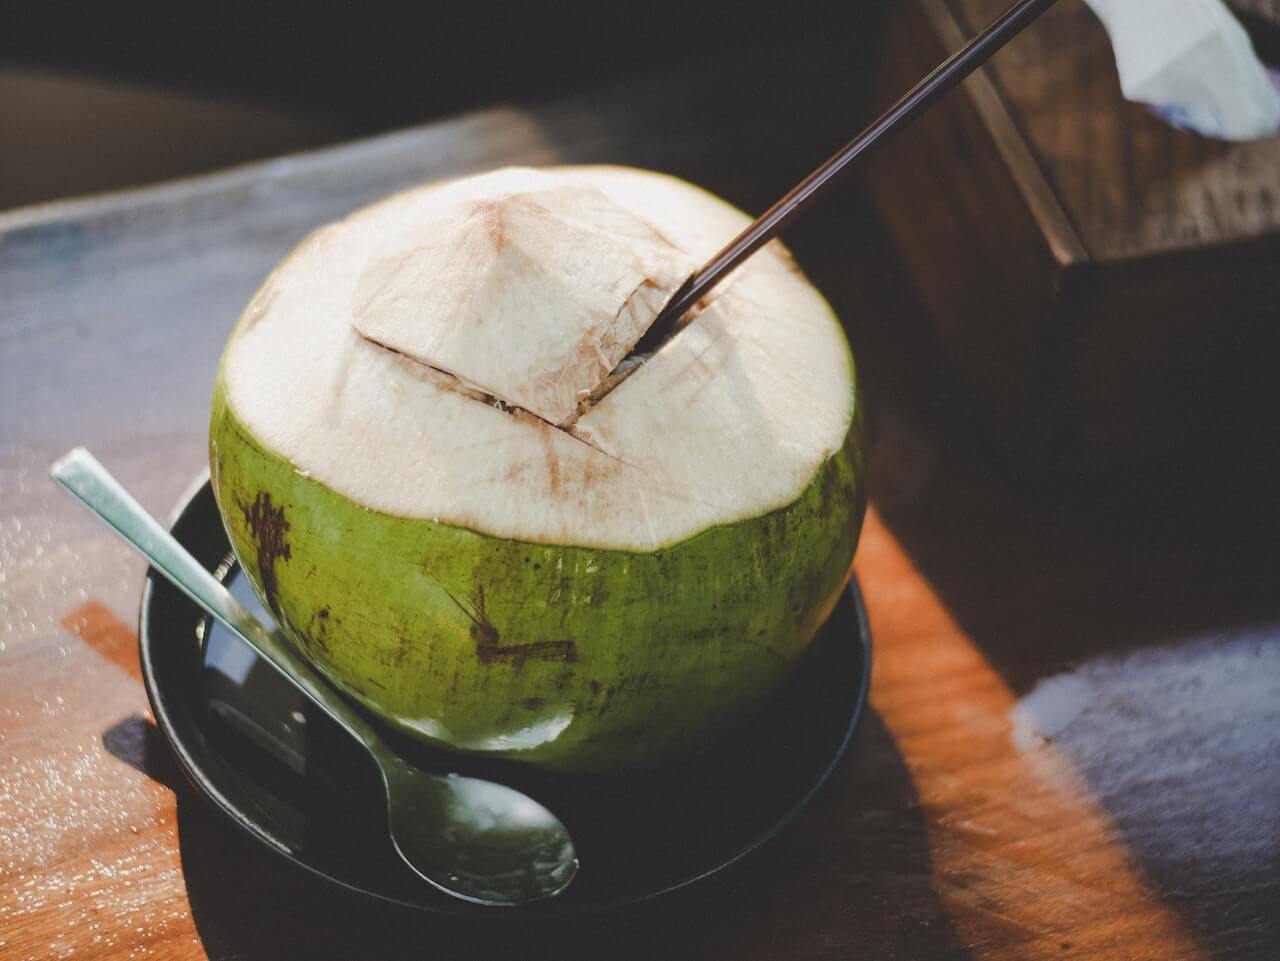 Coconut water business